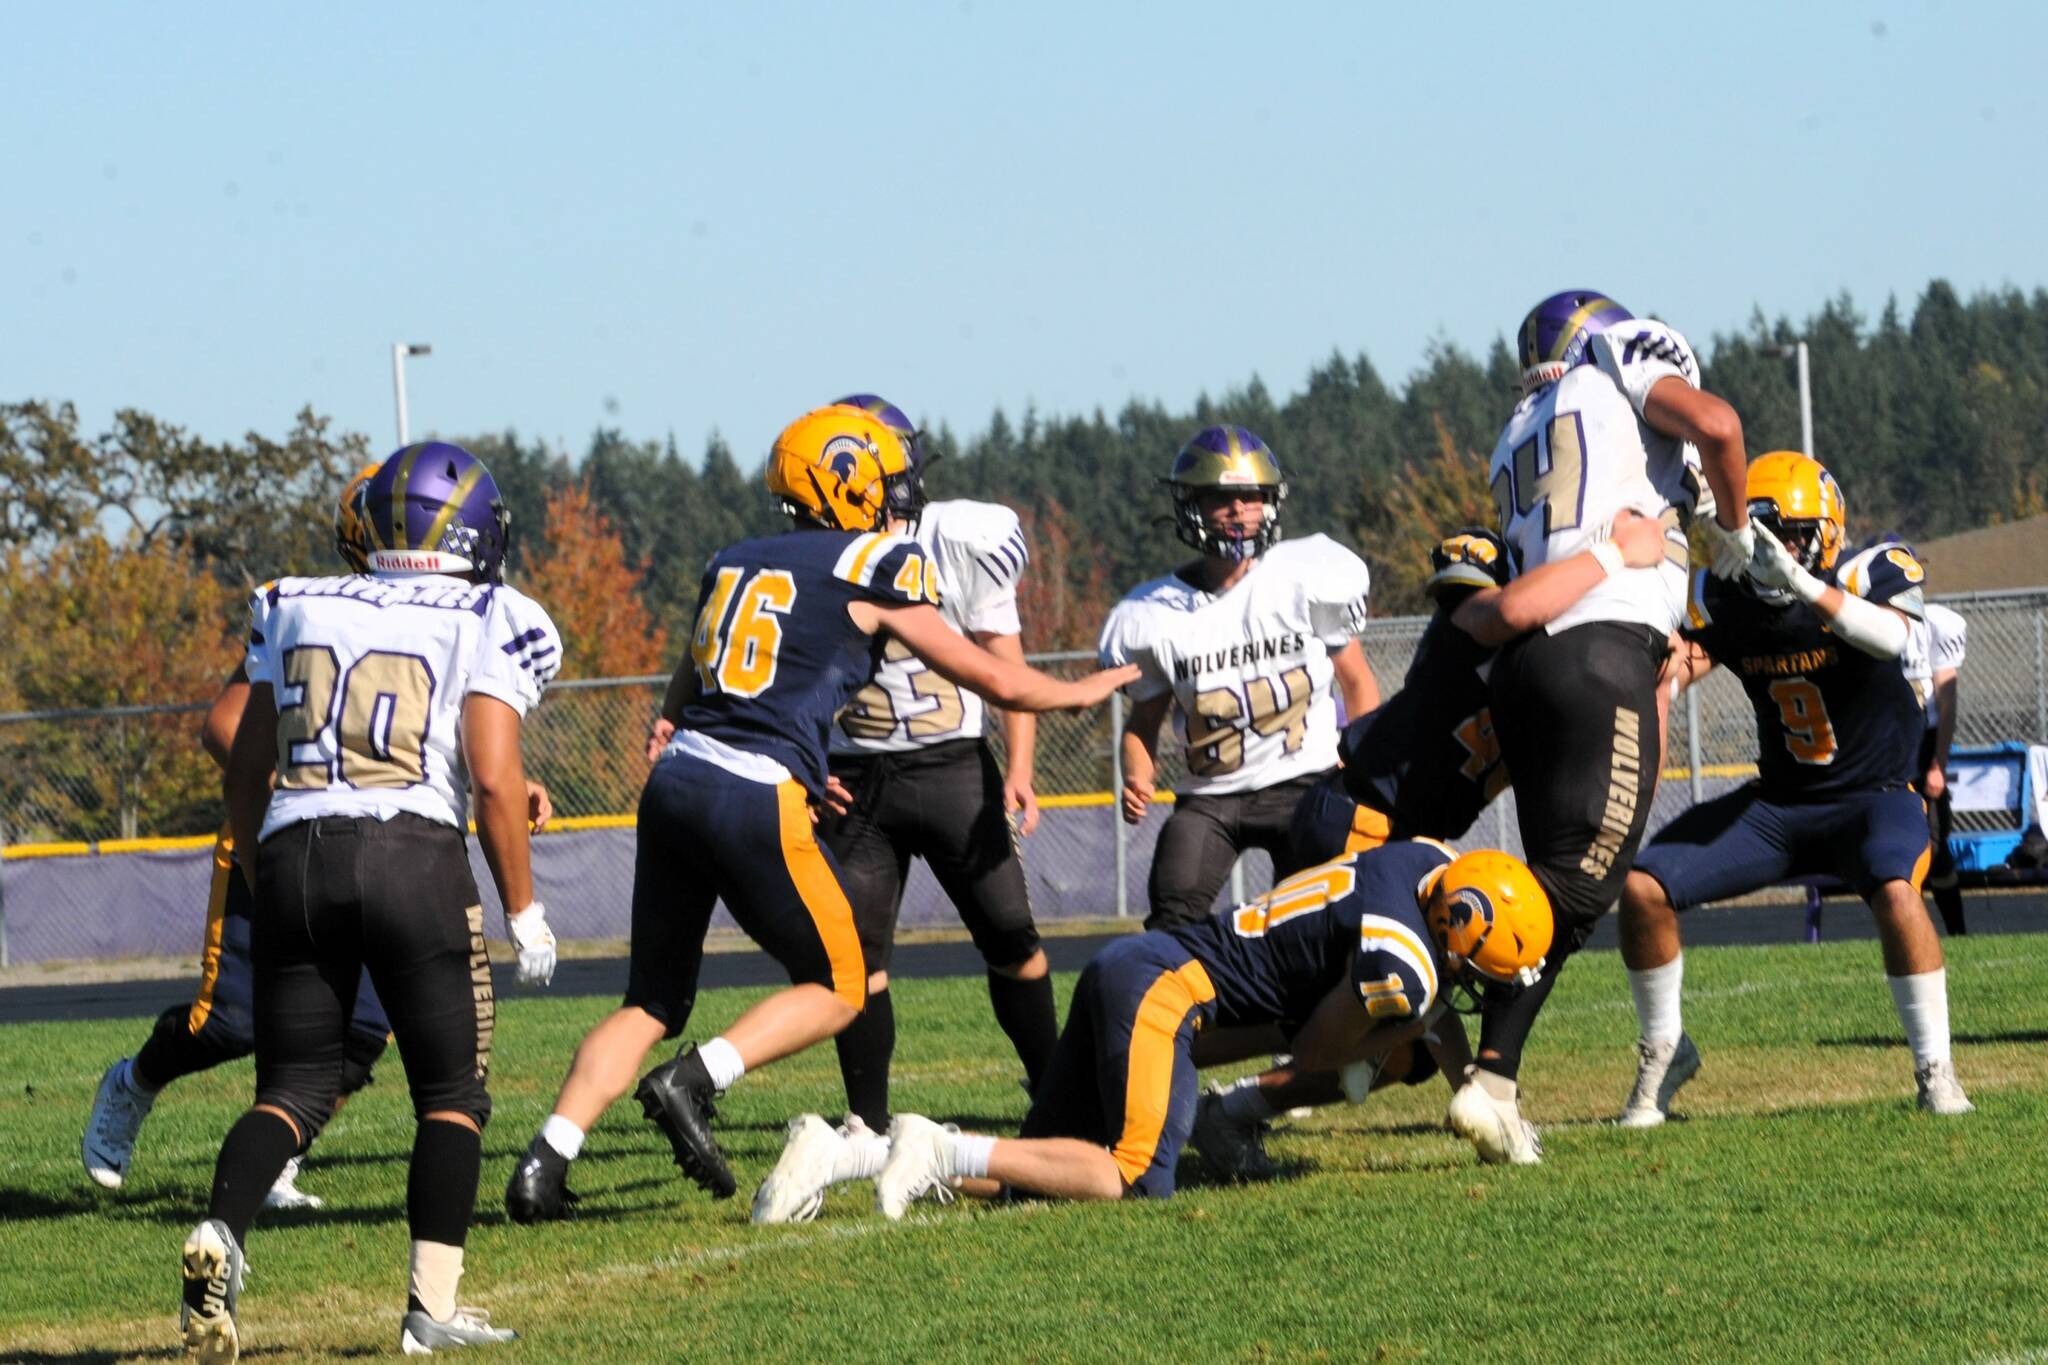 It was a strong defense that held the Friday Harbor Wolverines to only 6 points Saturday afternoon in Sequim. Pictured here bringing down the Friday Harbor runner are from left Brody Lausche, Landen Olson, Nate Dahlgren, and Kade Highfield. It was Forks 40 and Friday Harbor 6. Photo by Lonnie Archibald